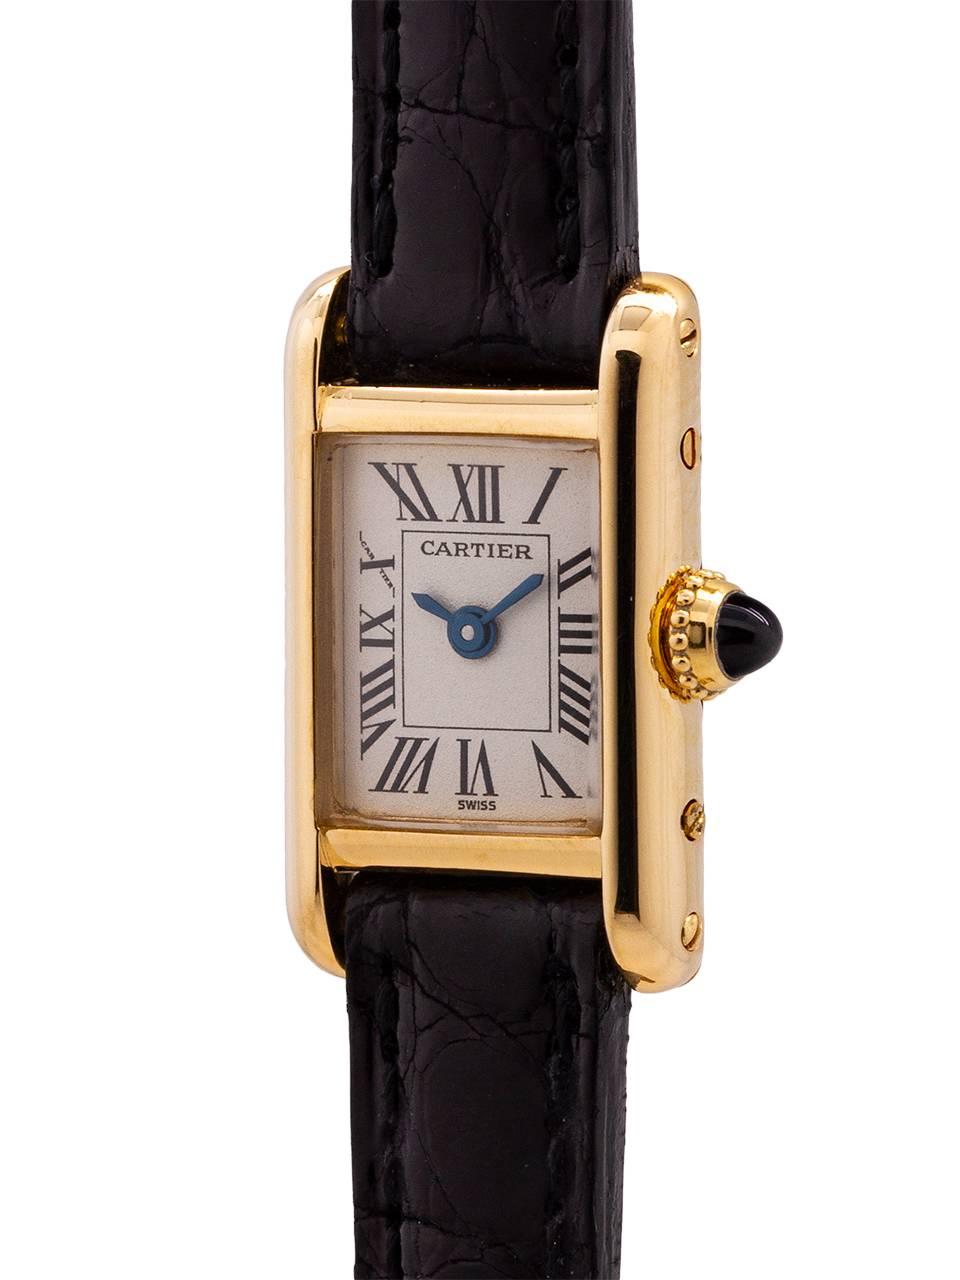 
Classic vintage circa 1980’s Cartier Lady’s 18K gold Tank Louis “mini” with quartz movement. Featuring a petite 19 x 24mm rectangular case secured by 4 side and 4 back case screws, and featuring an extremely nice condition classic original white